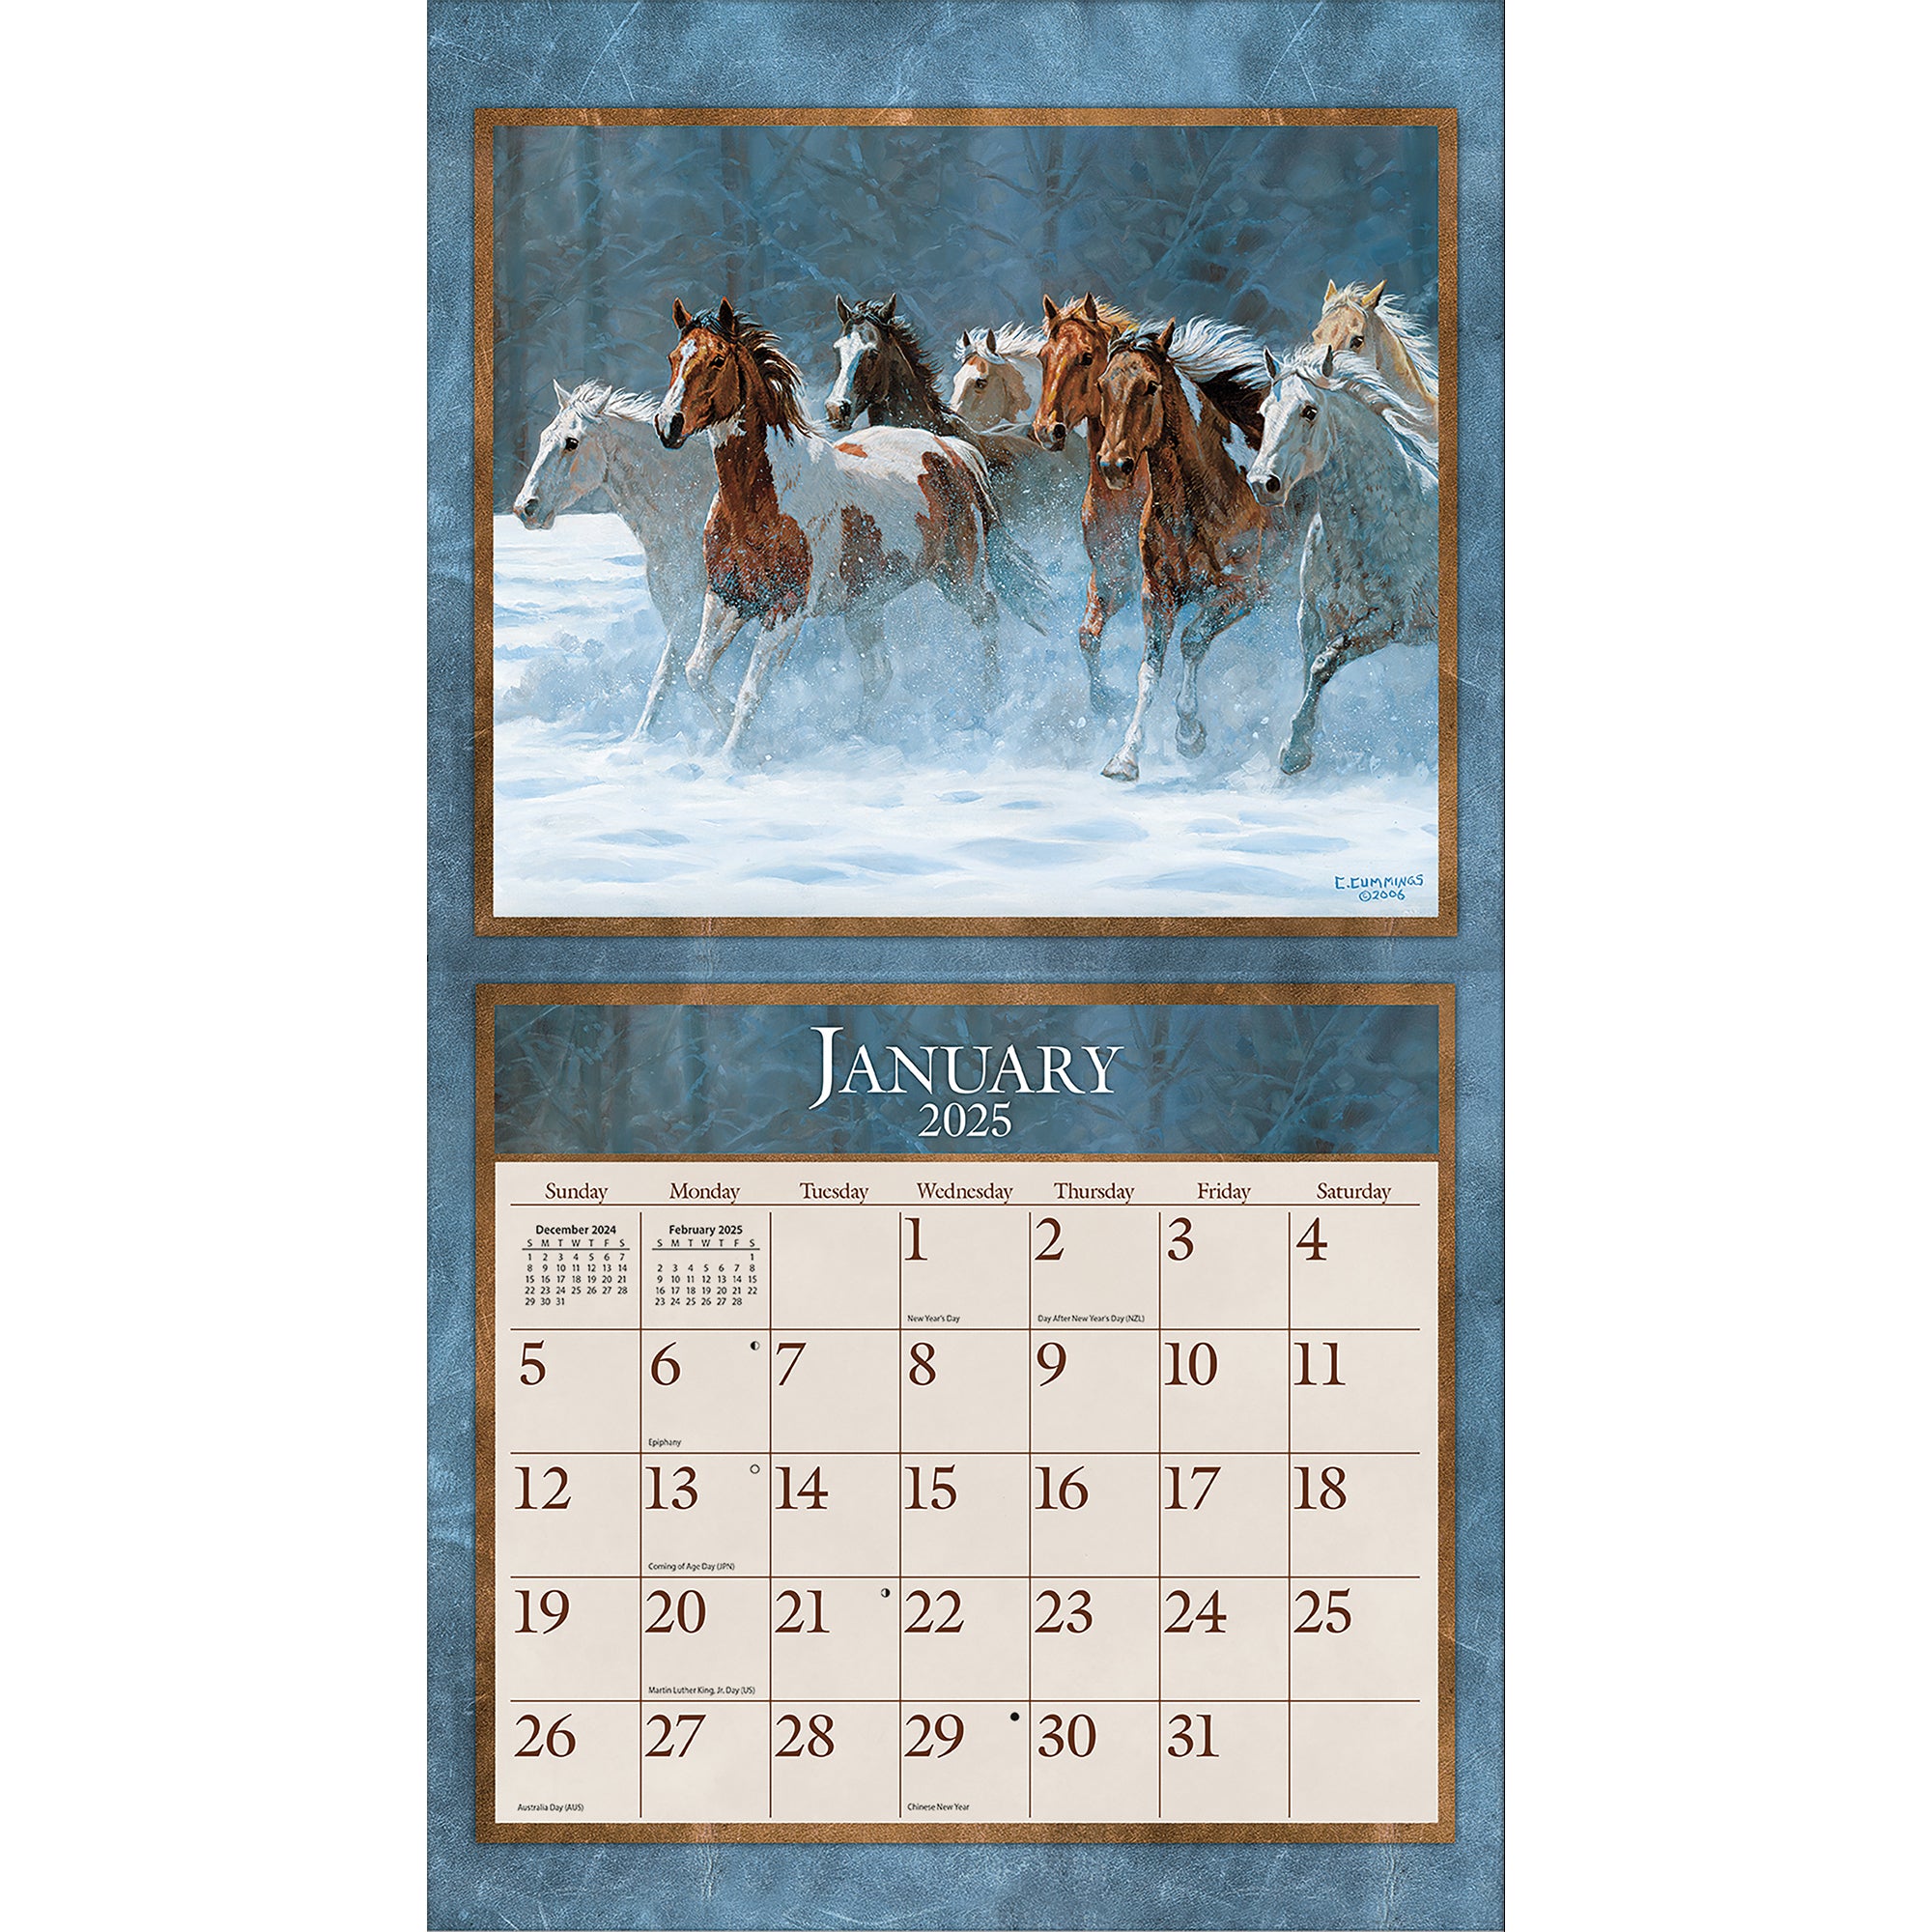 2025 Horses In The Mist - LANG Deluxe Wall Calendar